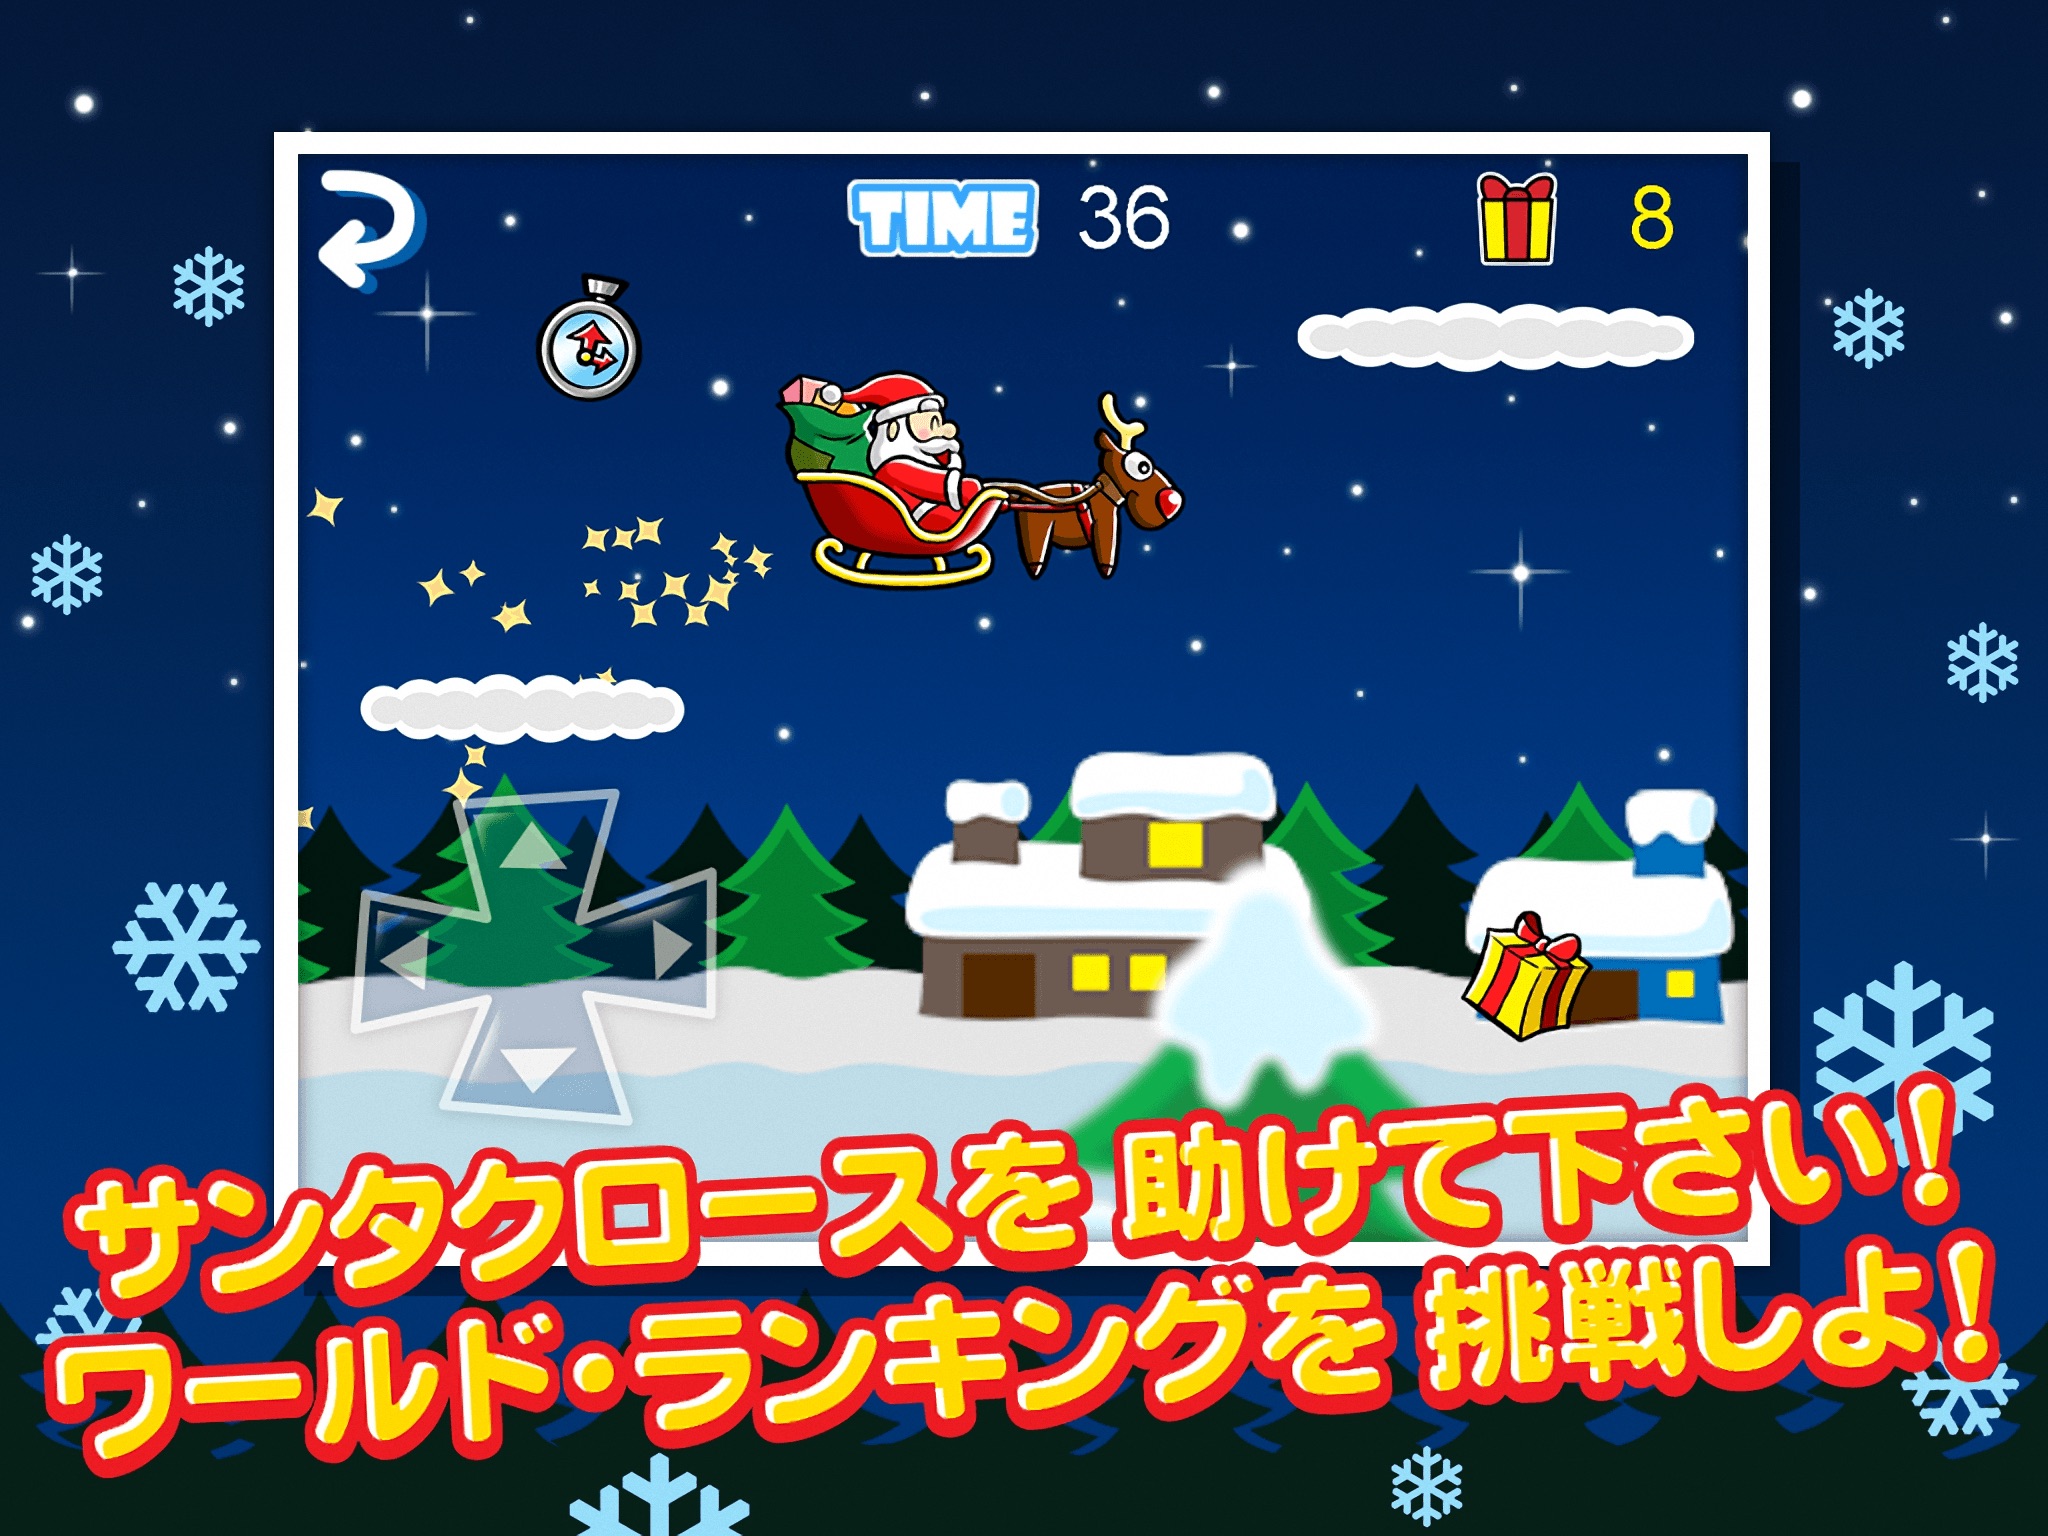 Santa Claus in Trouble ! HD - Reindeer Sled Run For The Christmas Gift screenshot 4